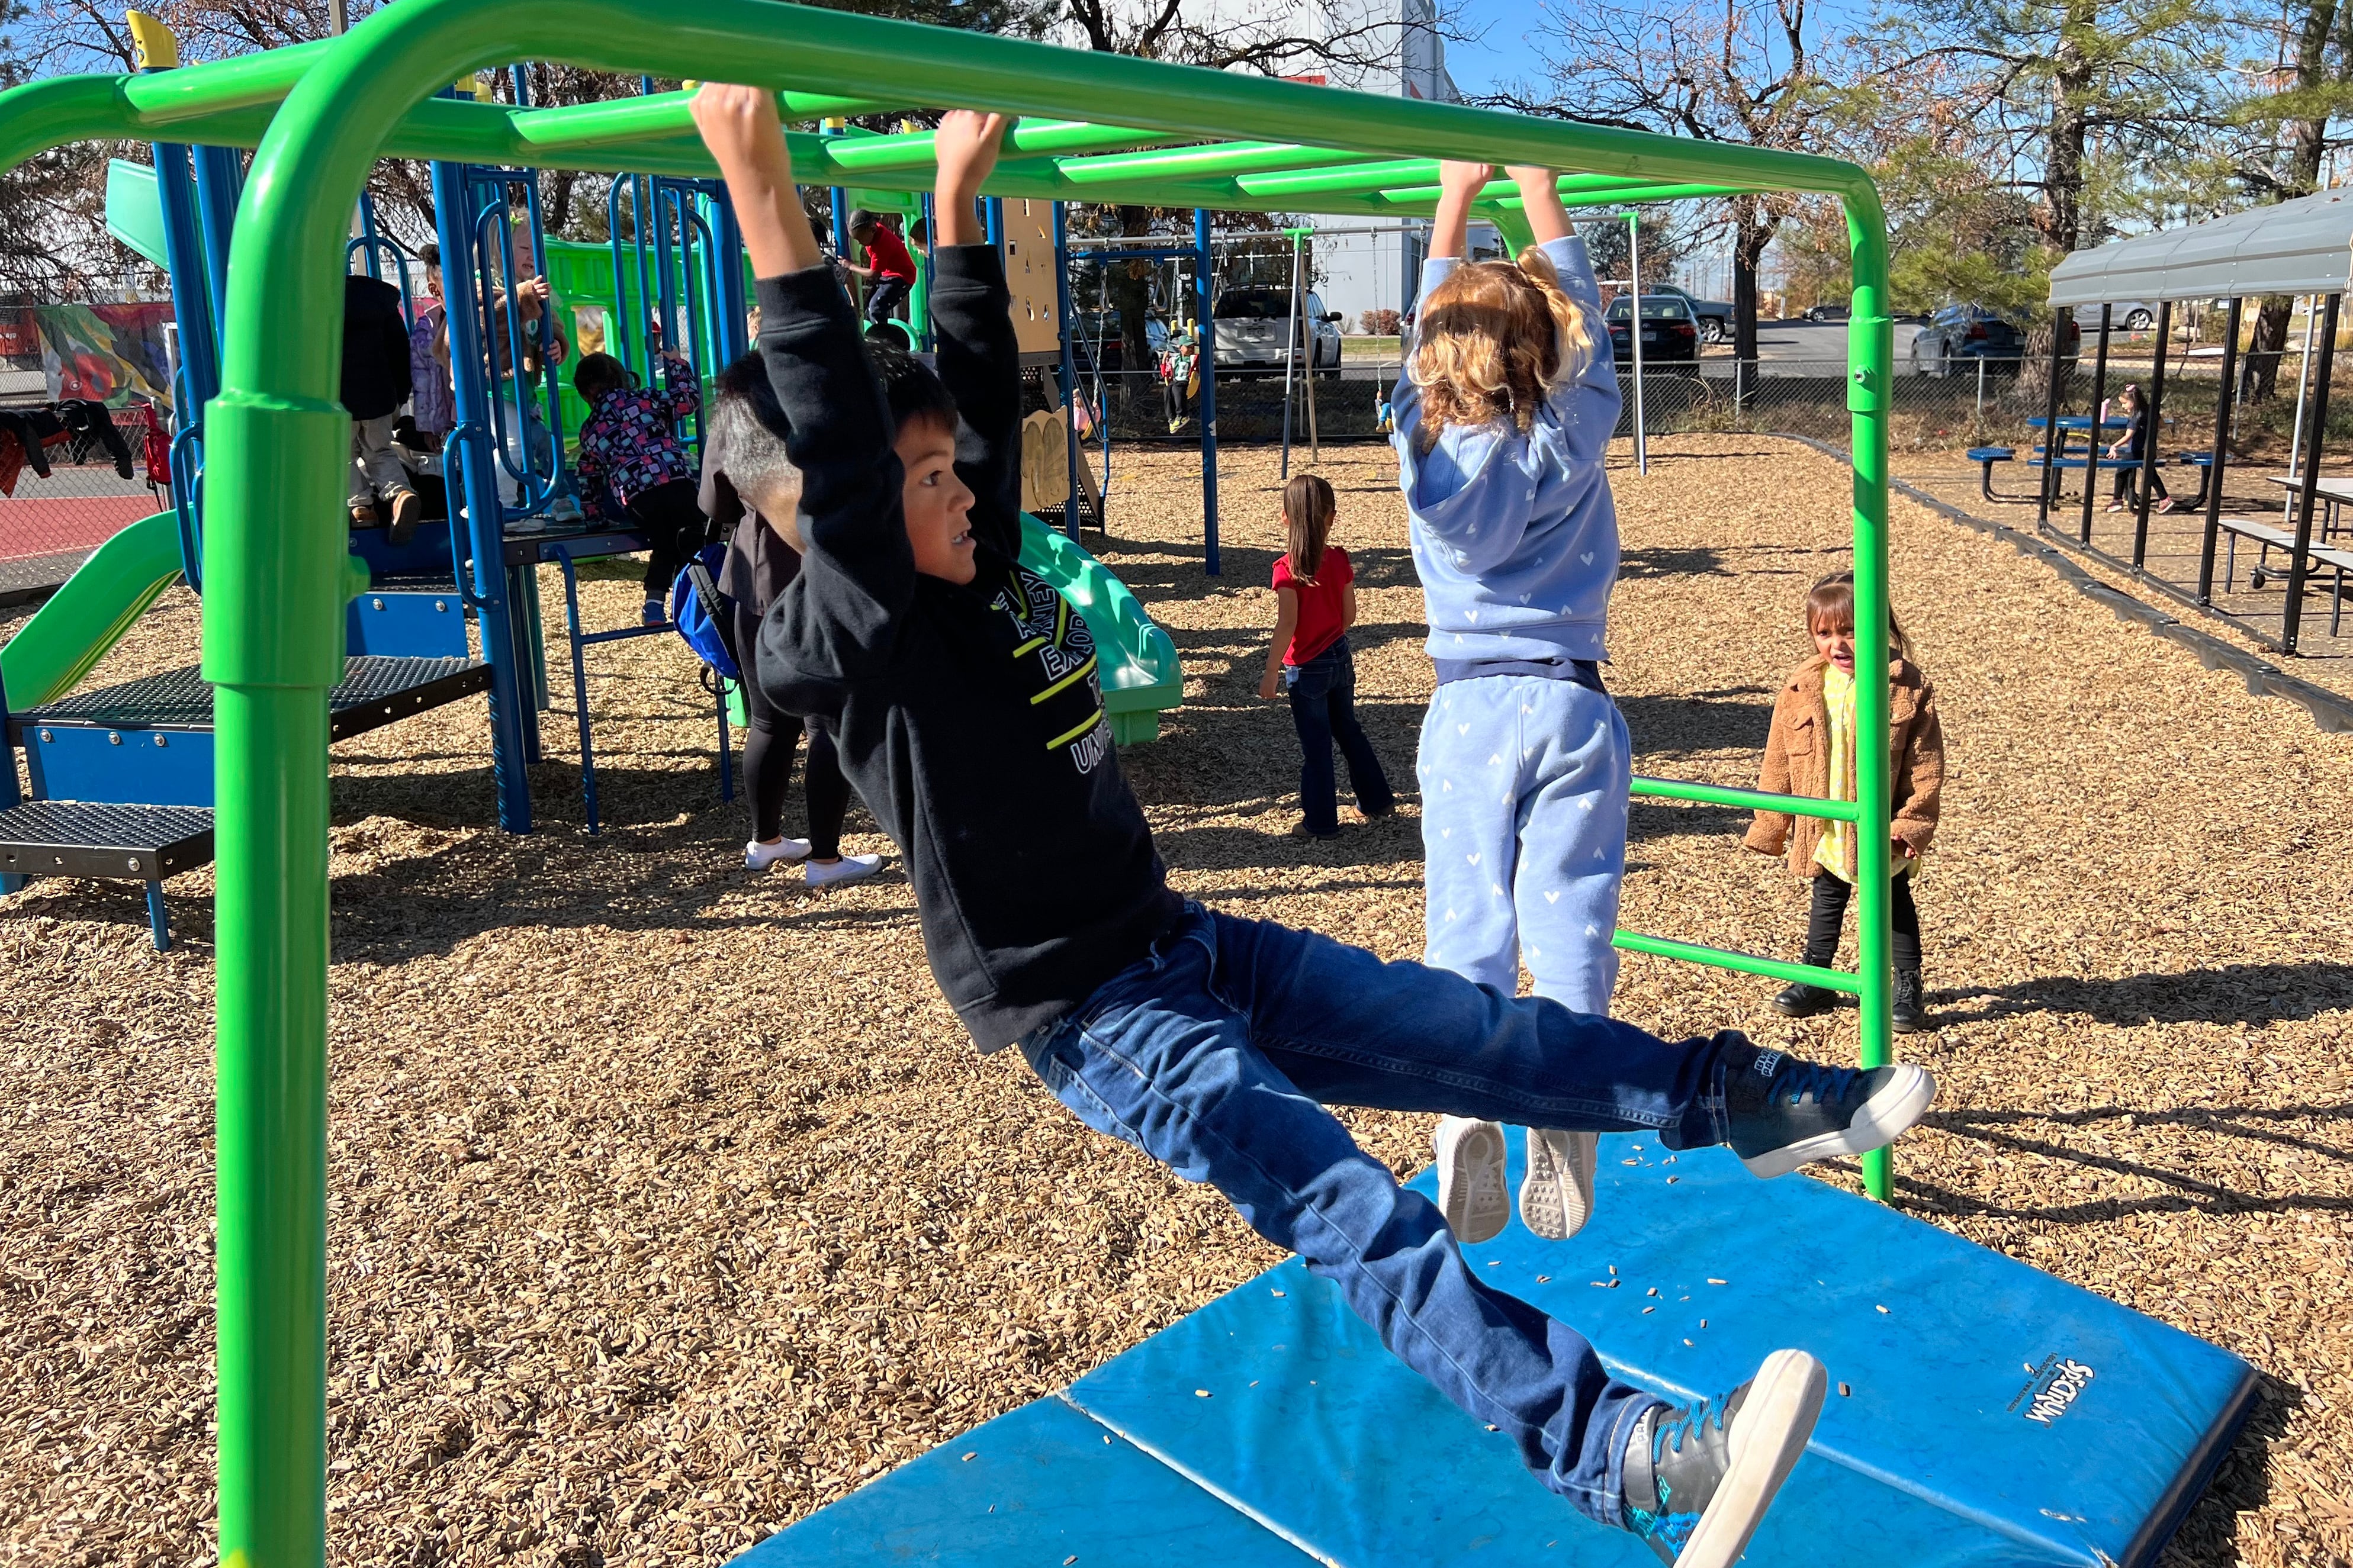 Two young kinds swing on bars at a playground outside with other young students in the background.